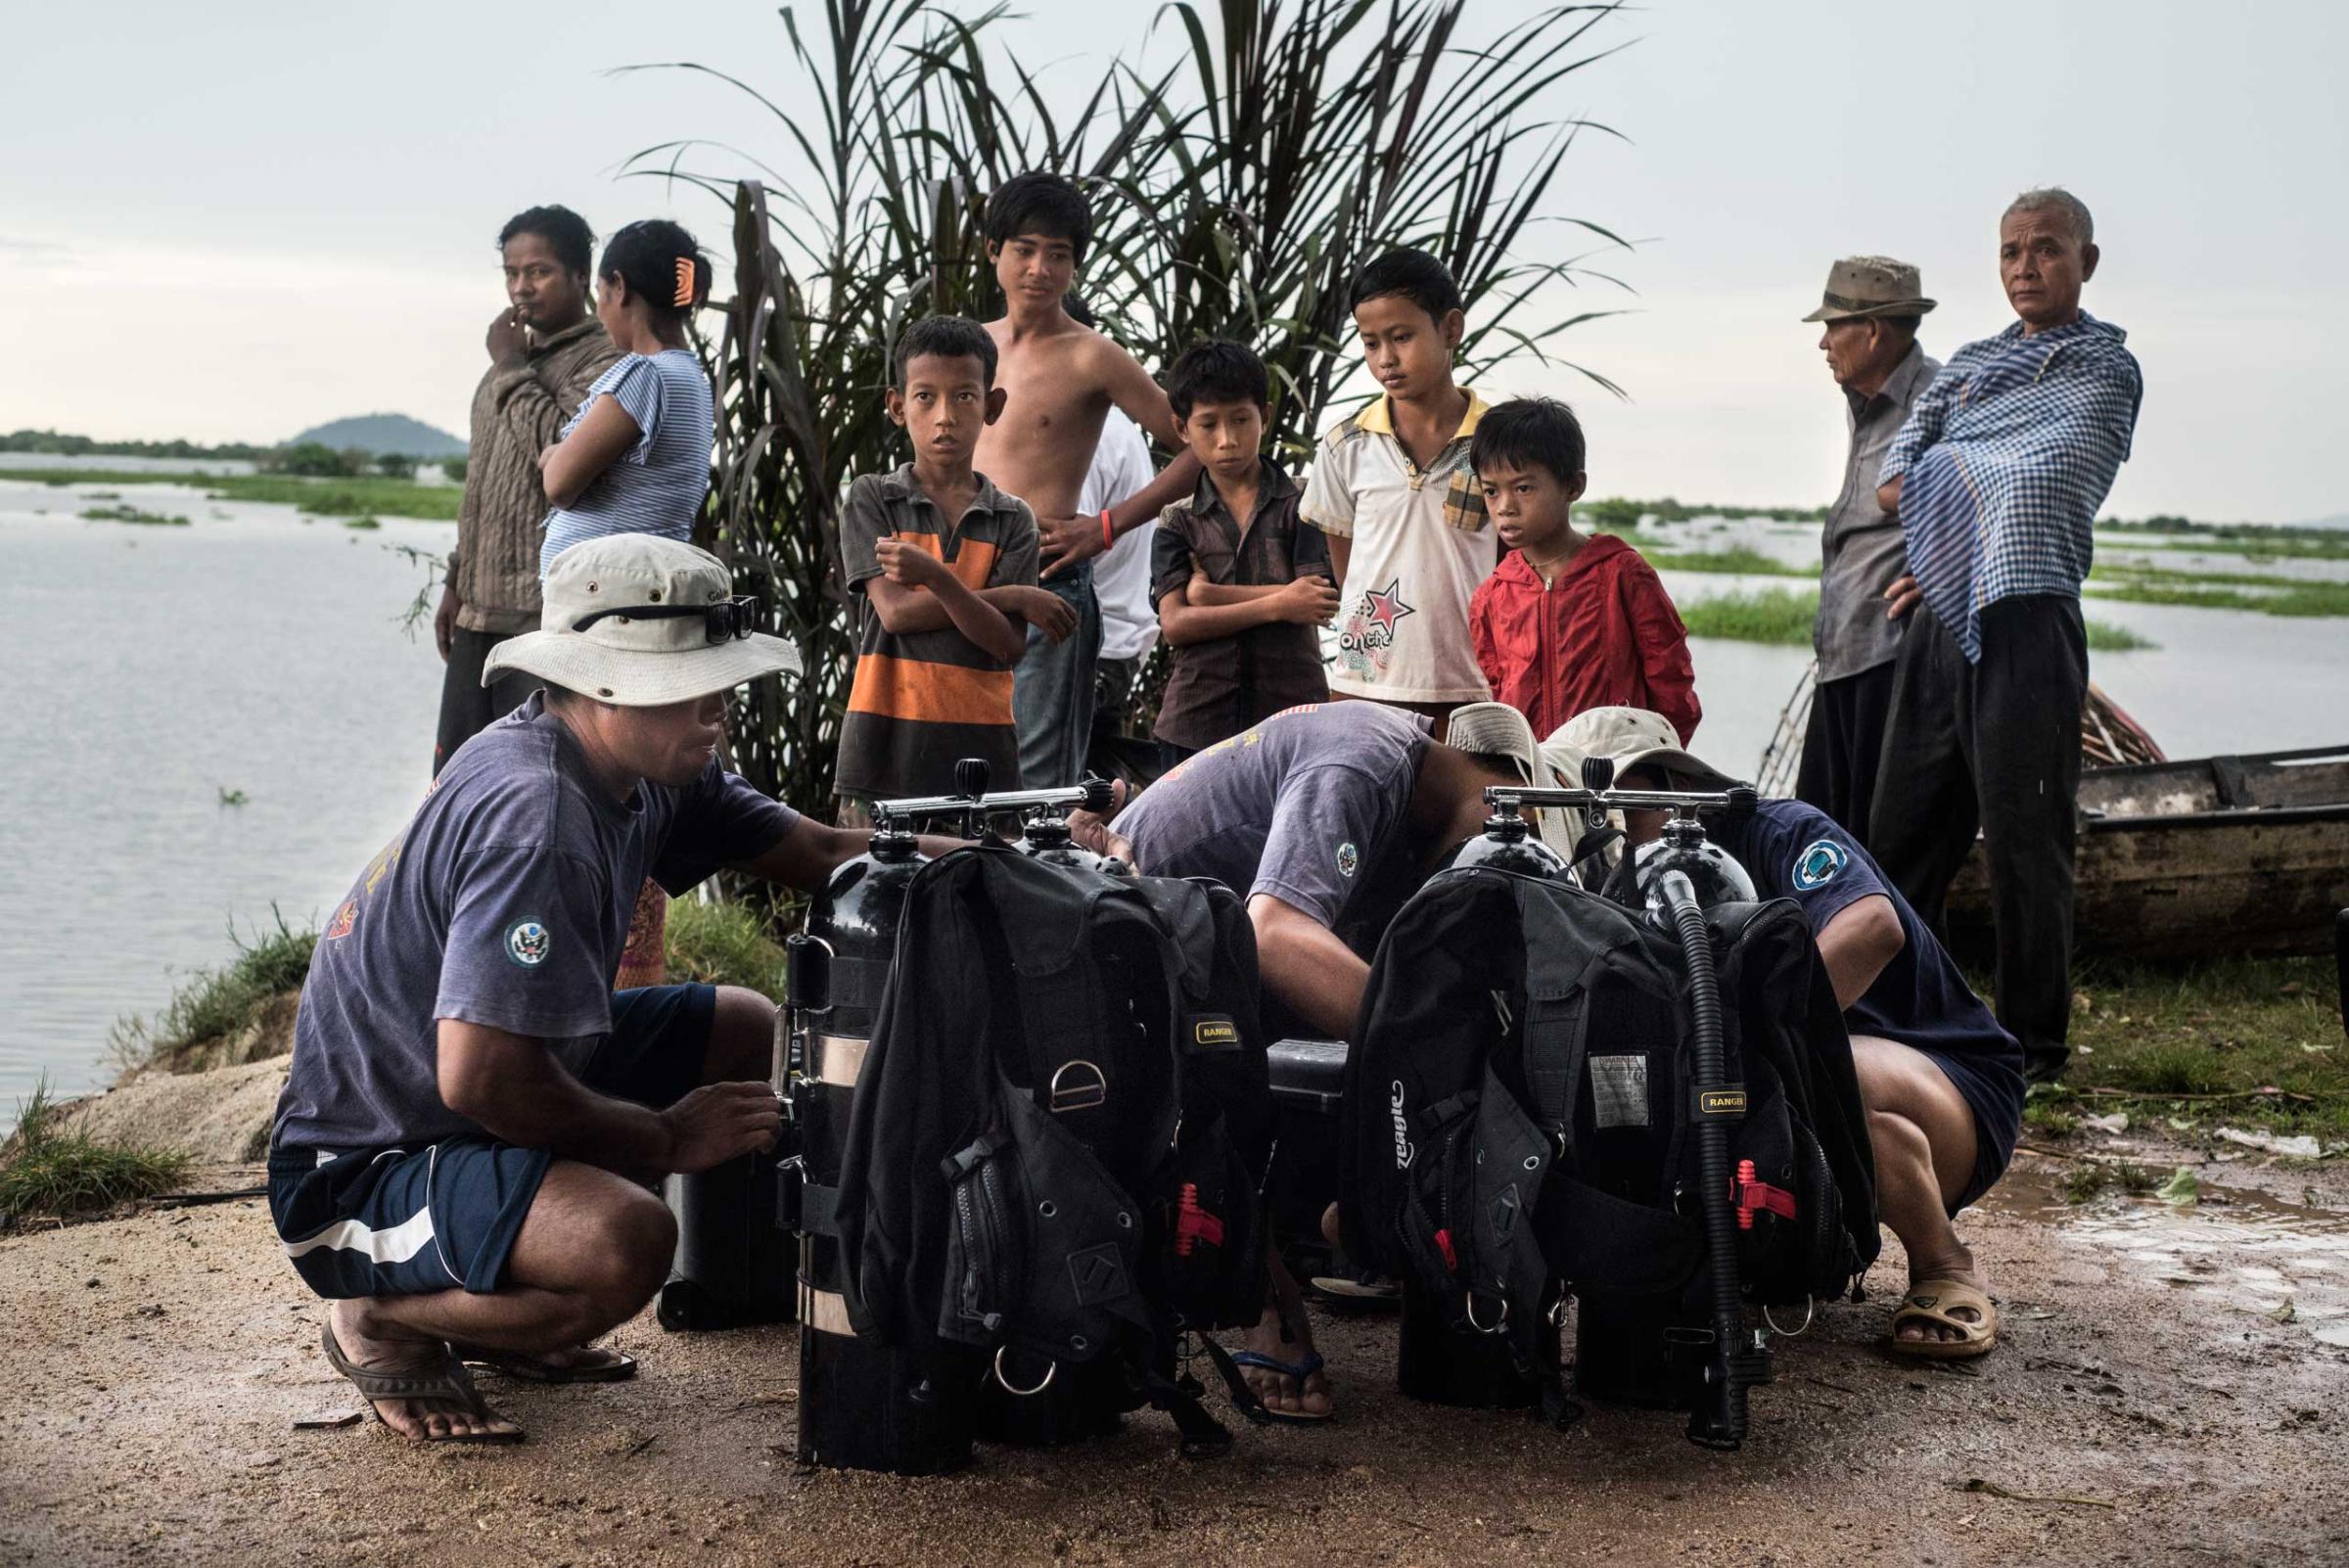 Members of the UXO salvage dive team prepare dive equipment on the banks of the Tonle Sap river overlooked by local villagers in Dec. 2014.